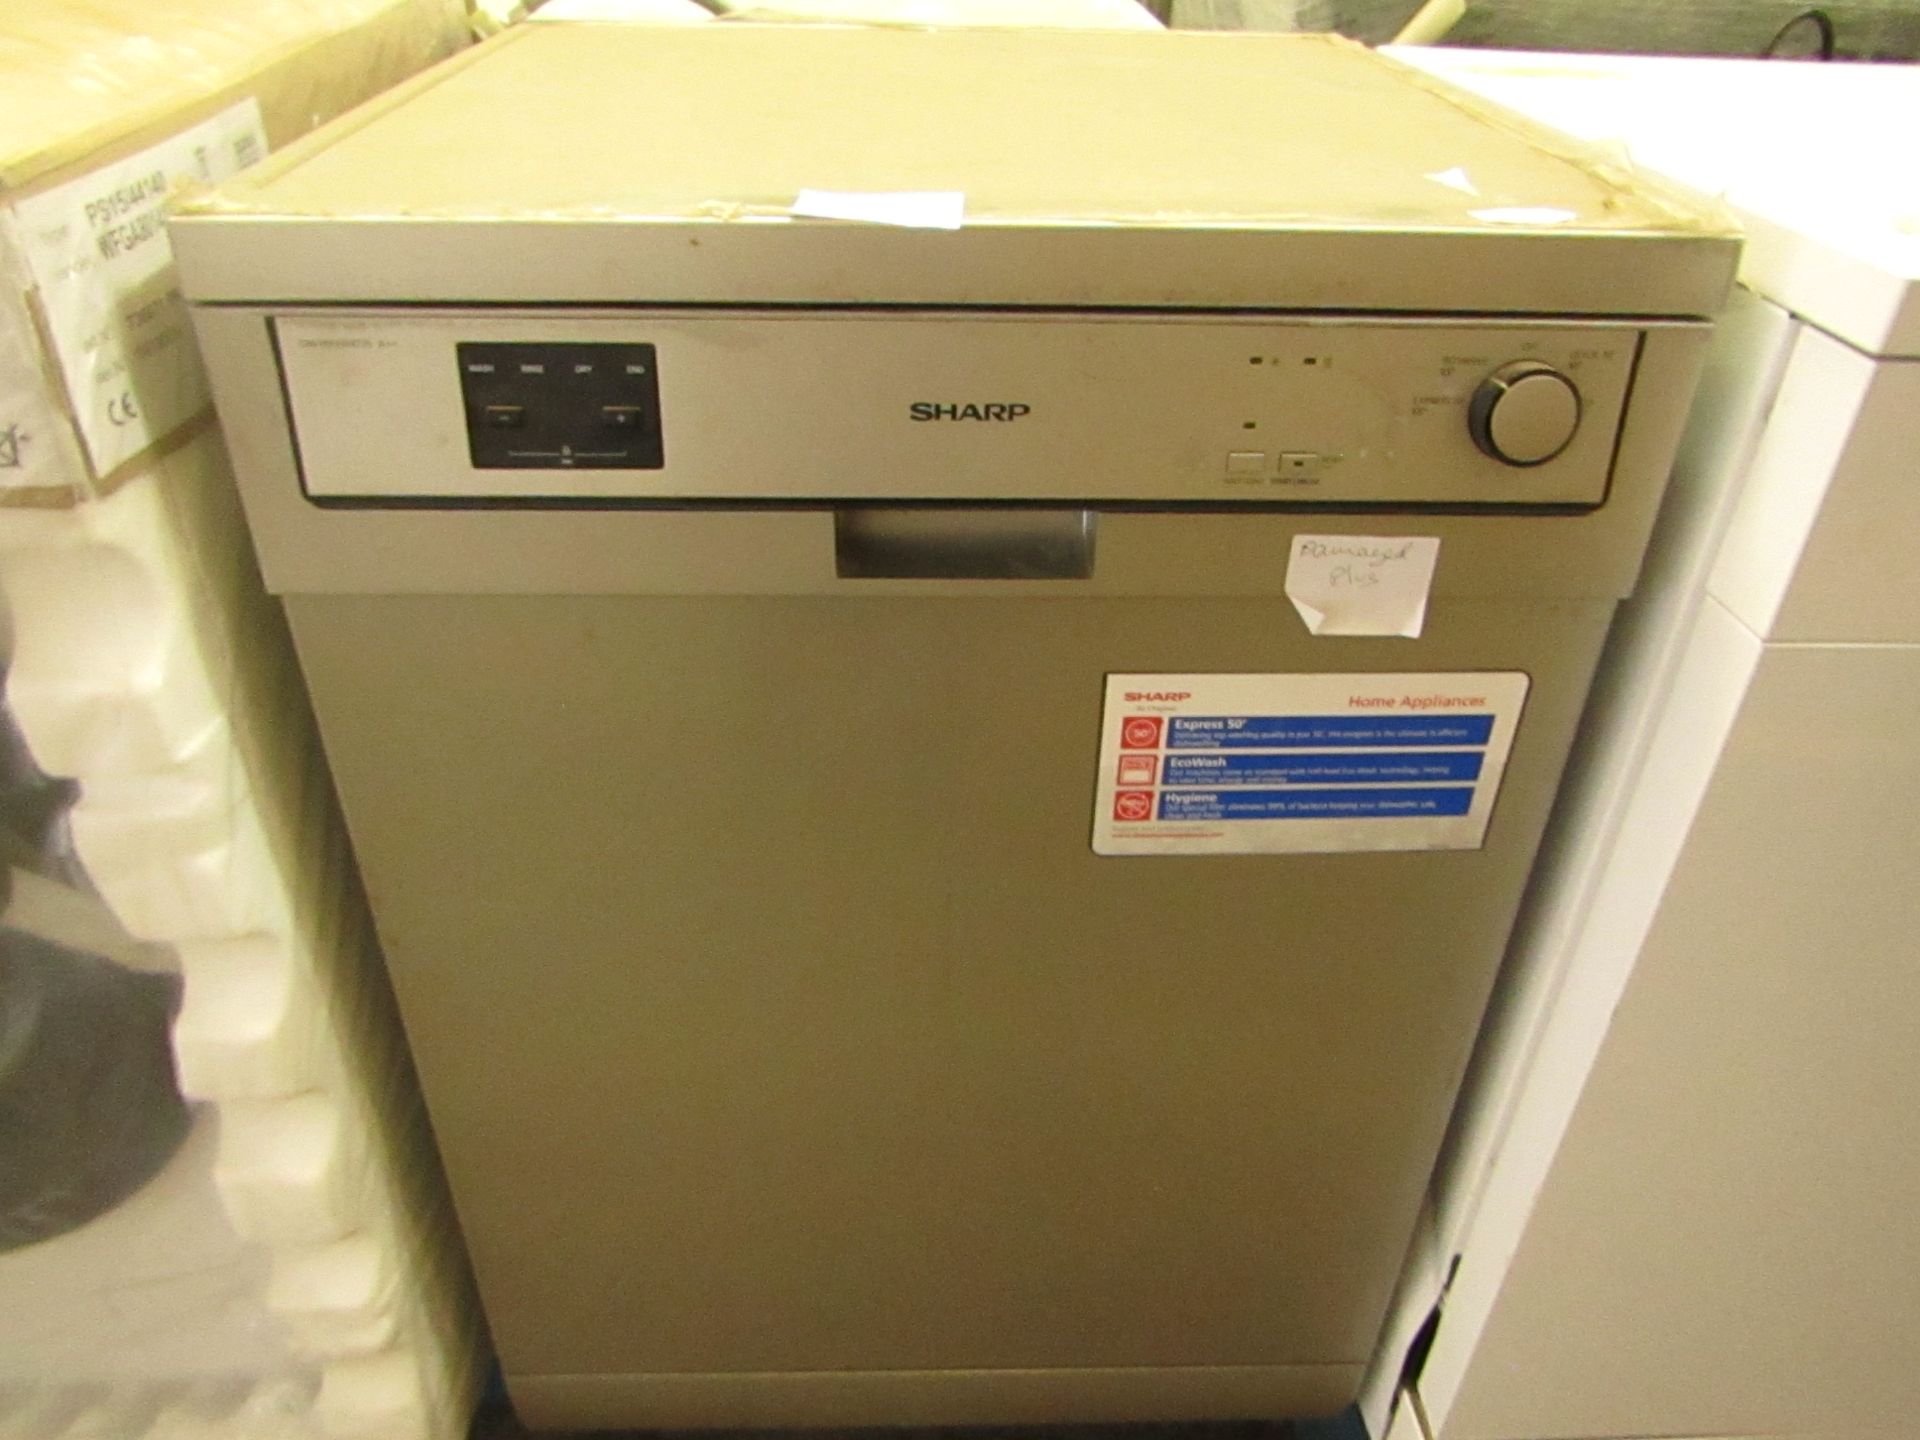 Sharp - Dishwasher - Grey ( QW-HX13F472S ) - Unable To Test Due To Damaged Plug, May Need A Clean.